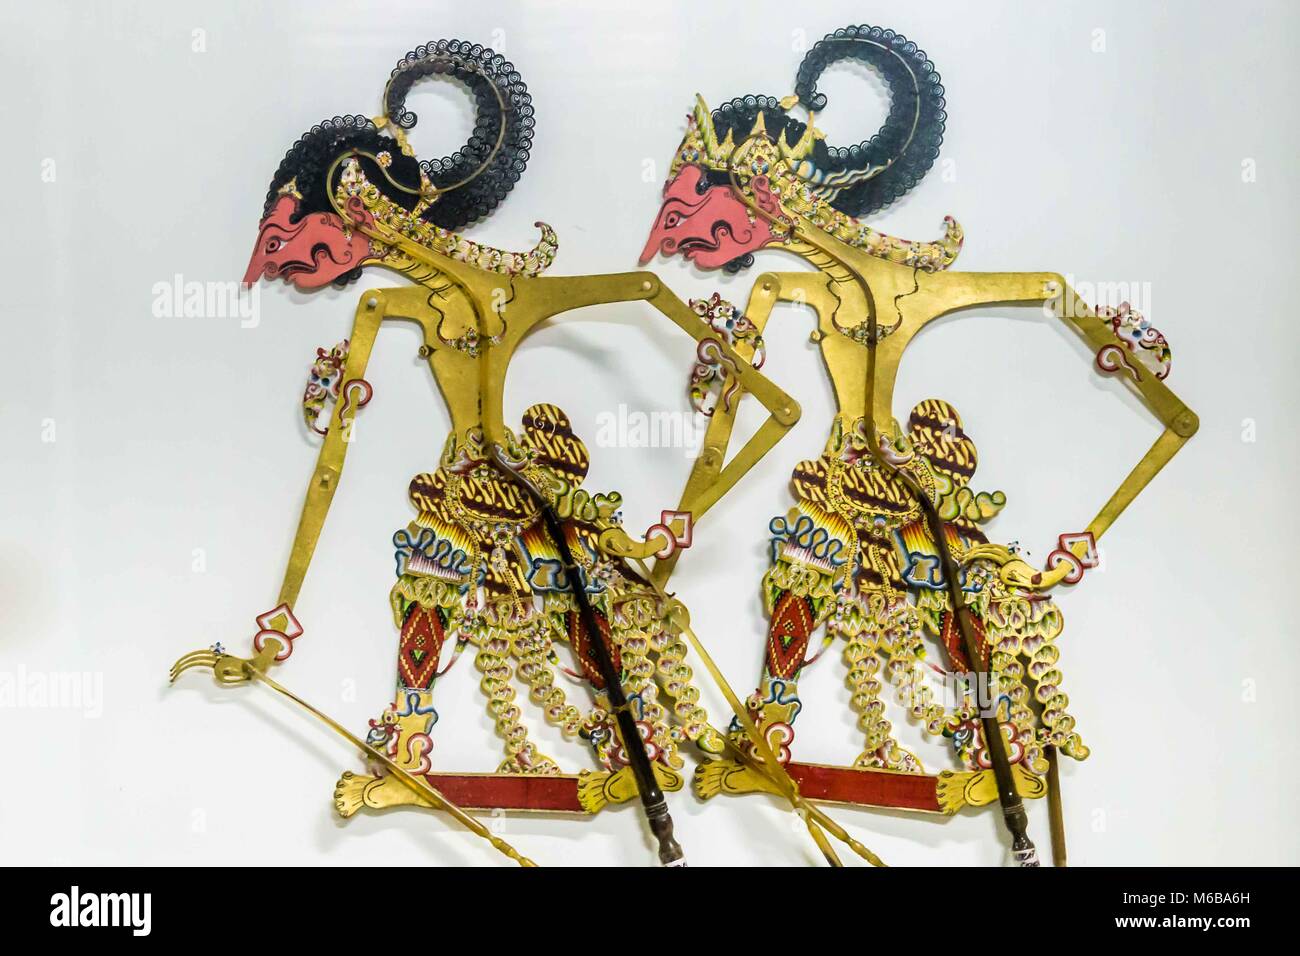 Wayang puppets of Indonesia Stock Photo